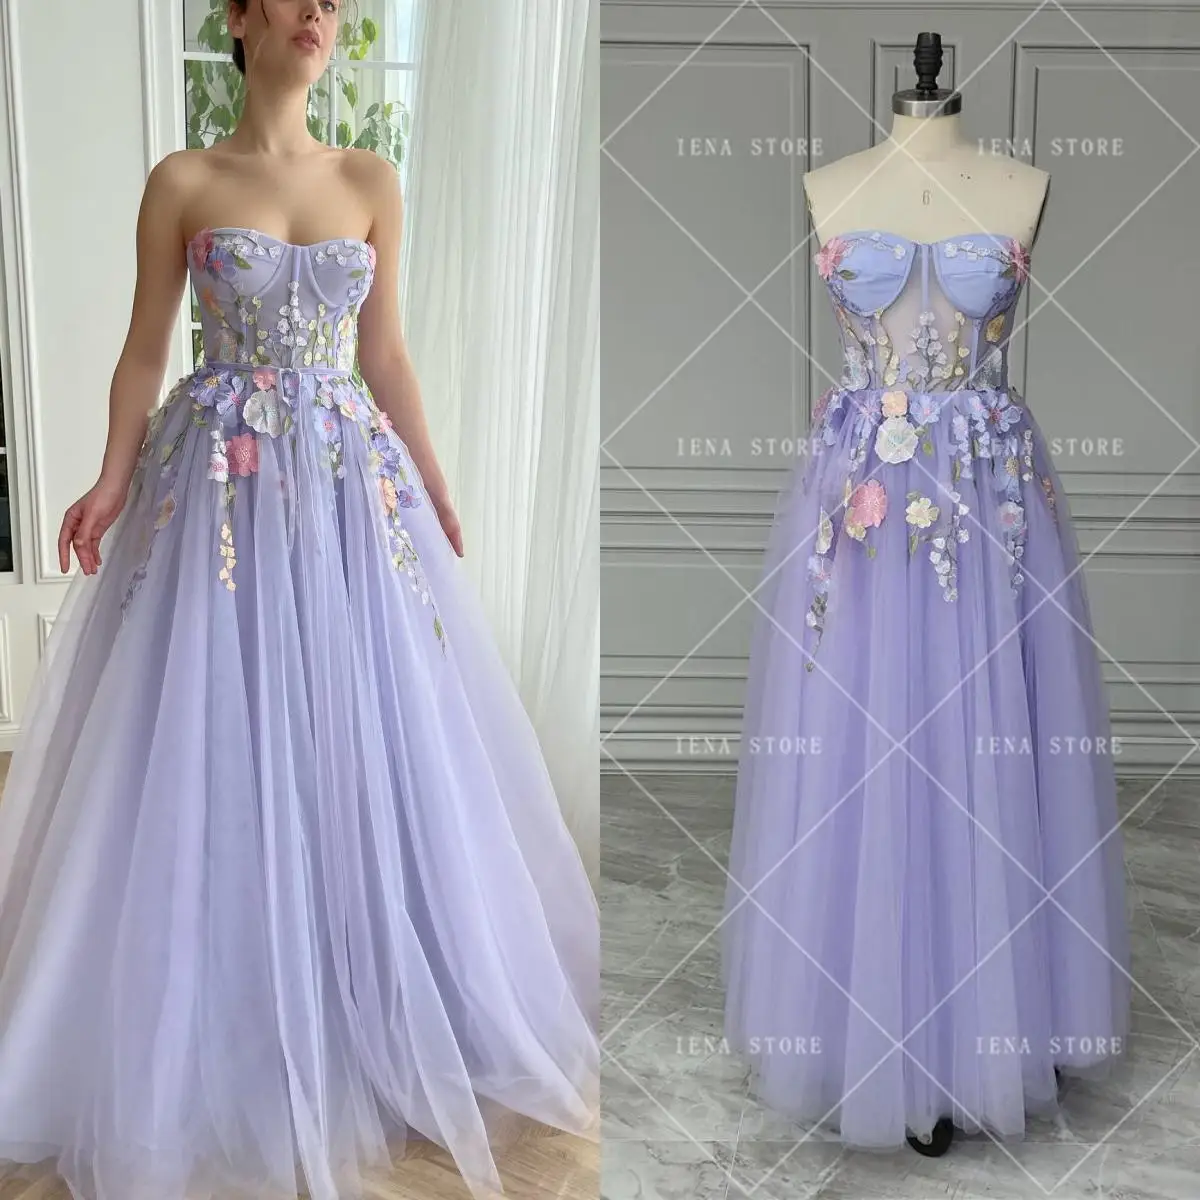 

14766#IENA Lavender Floral Tulle Maxi Evening Dresses Strapless Flower Appliques A-Line Prom Party Gowns Formal Event Dresses